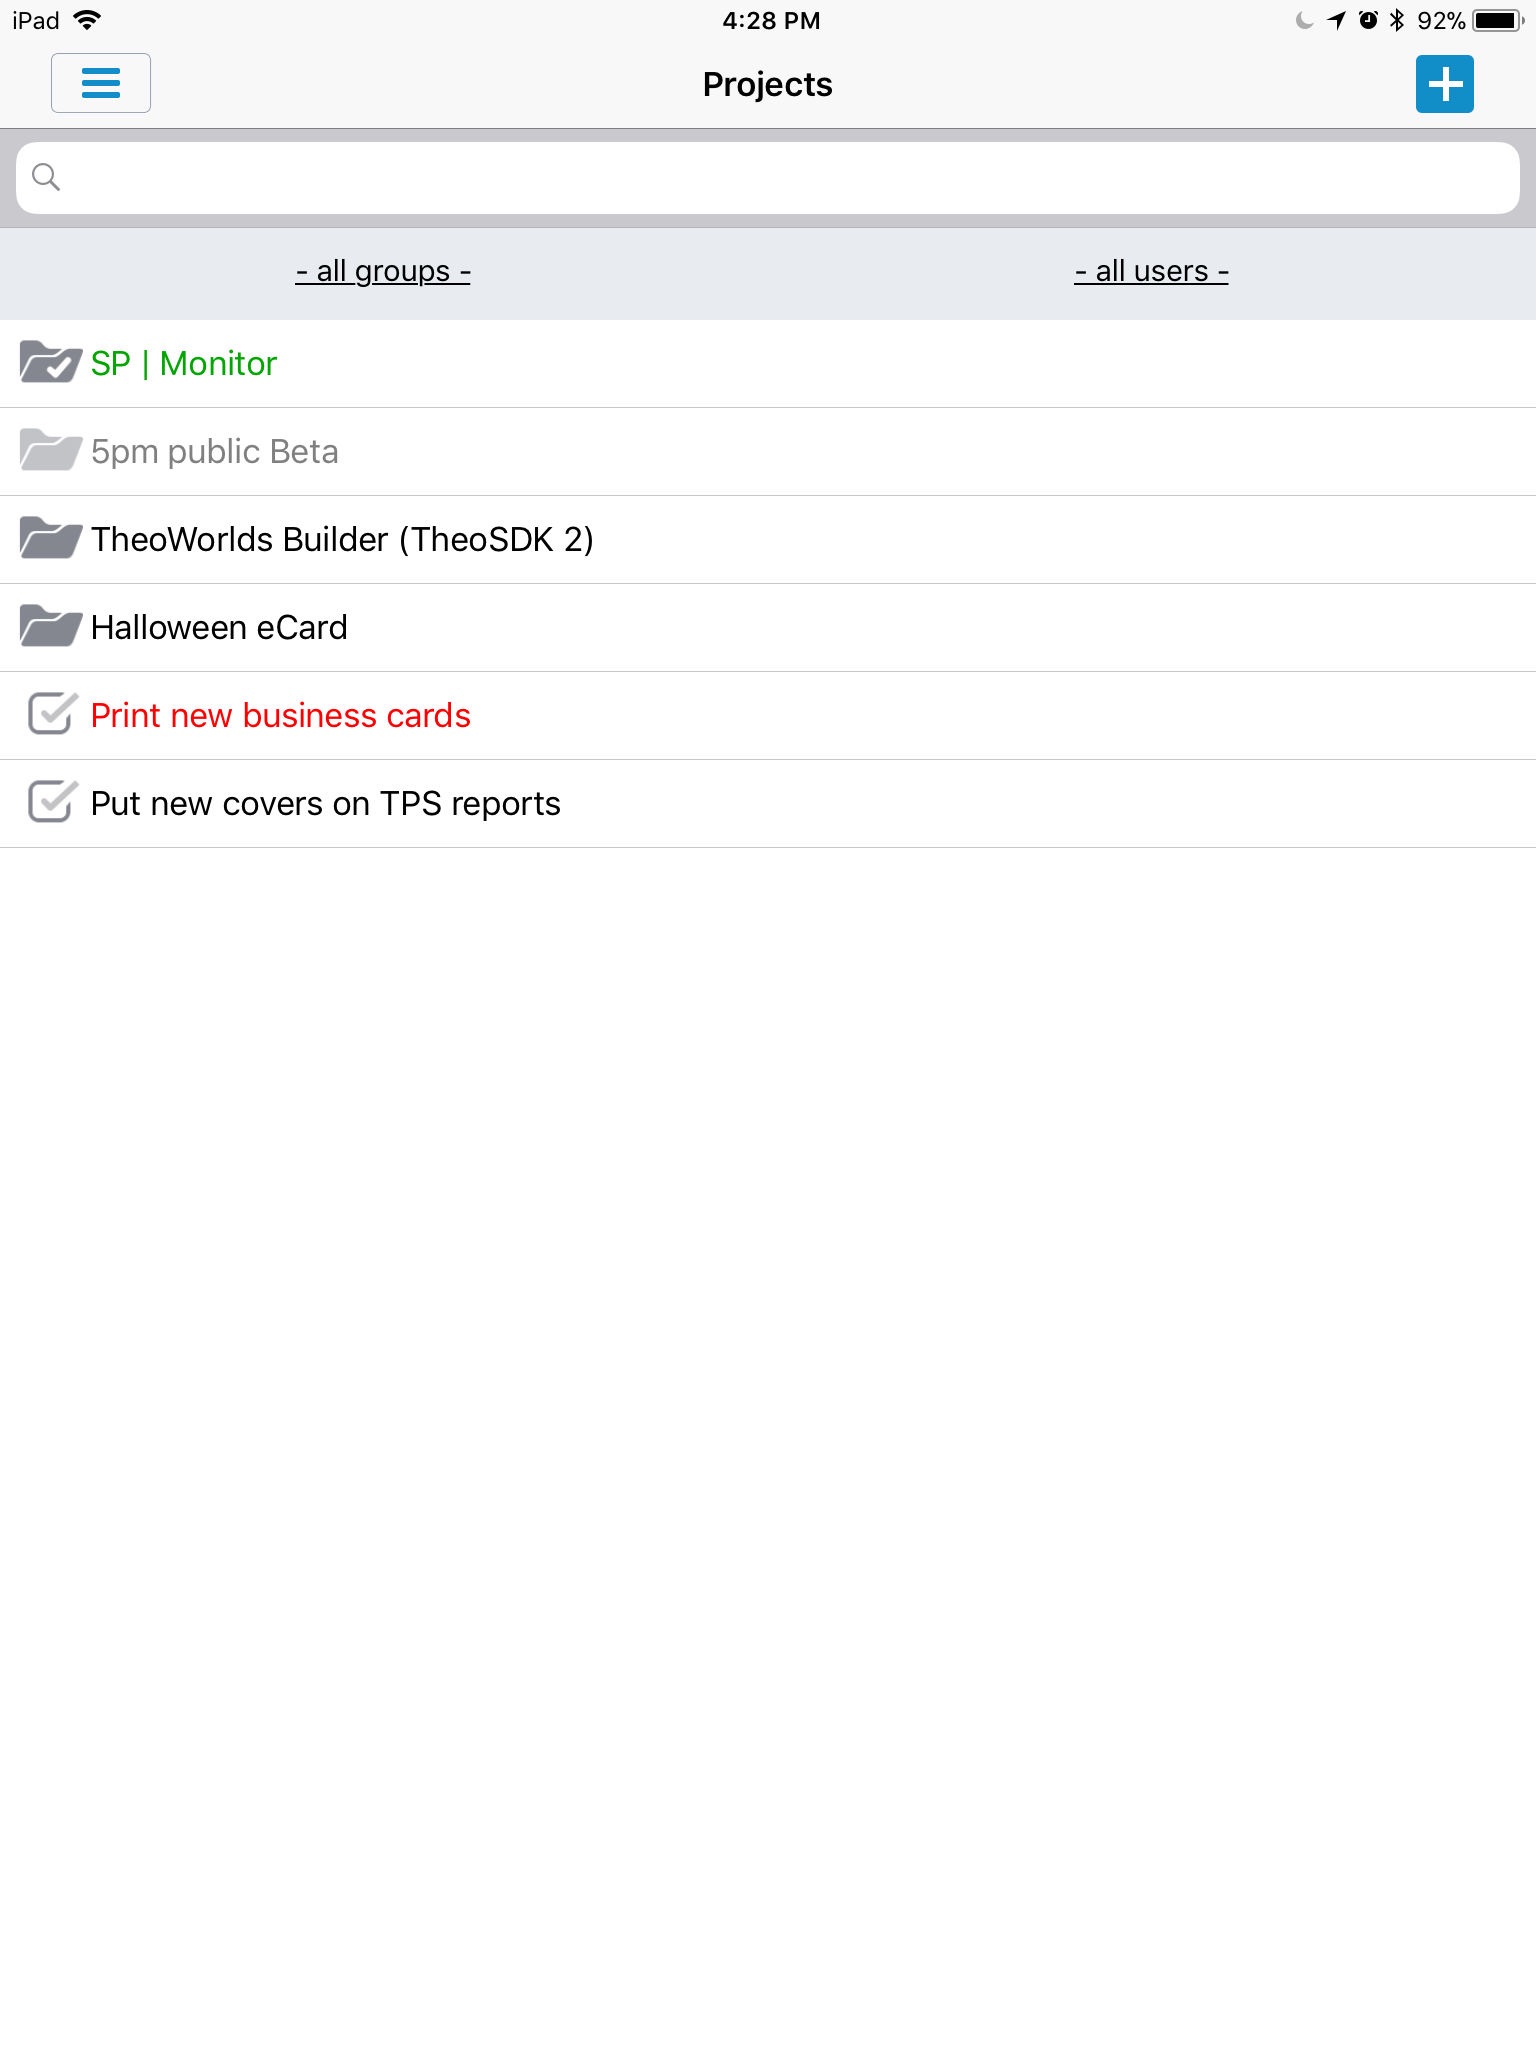 5pm Project Management on Time screenshot 2